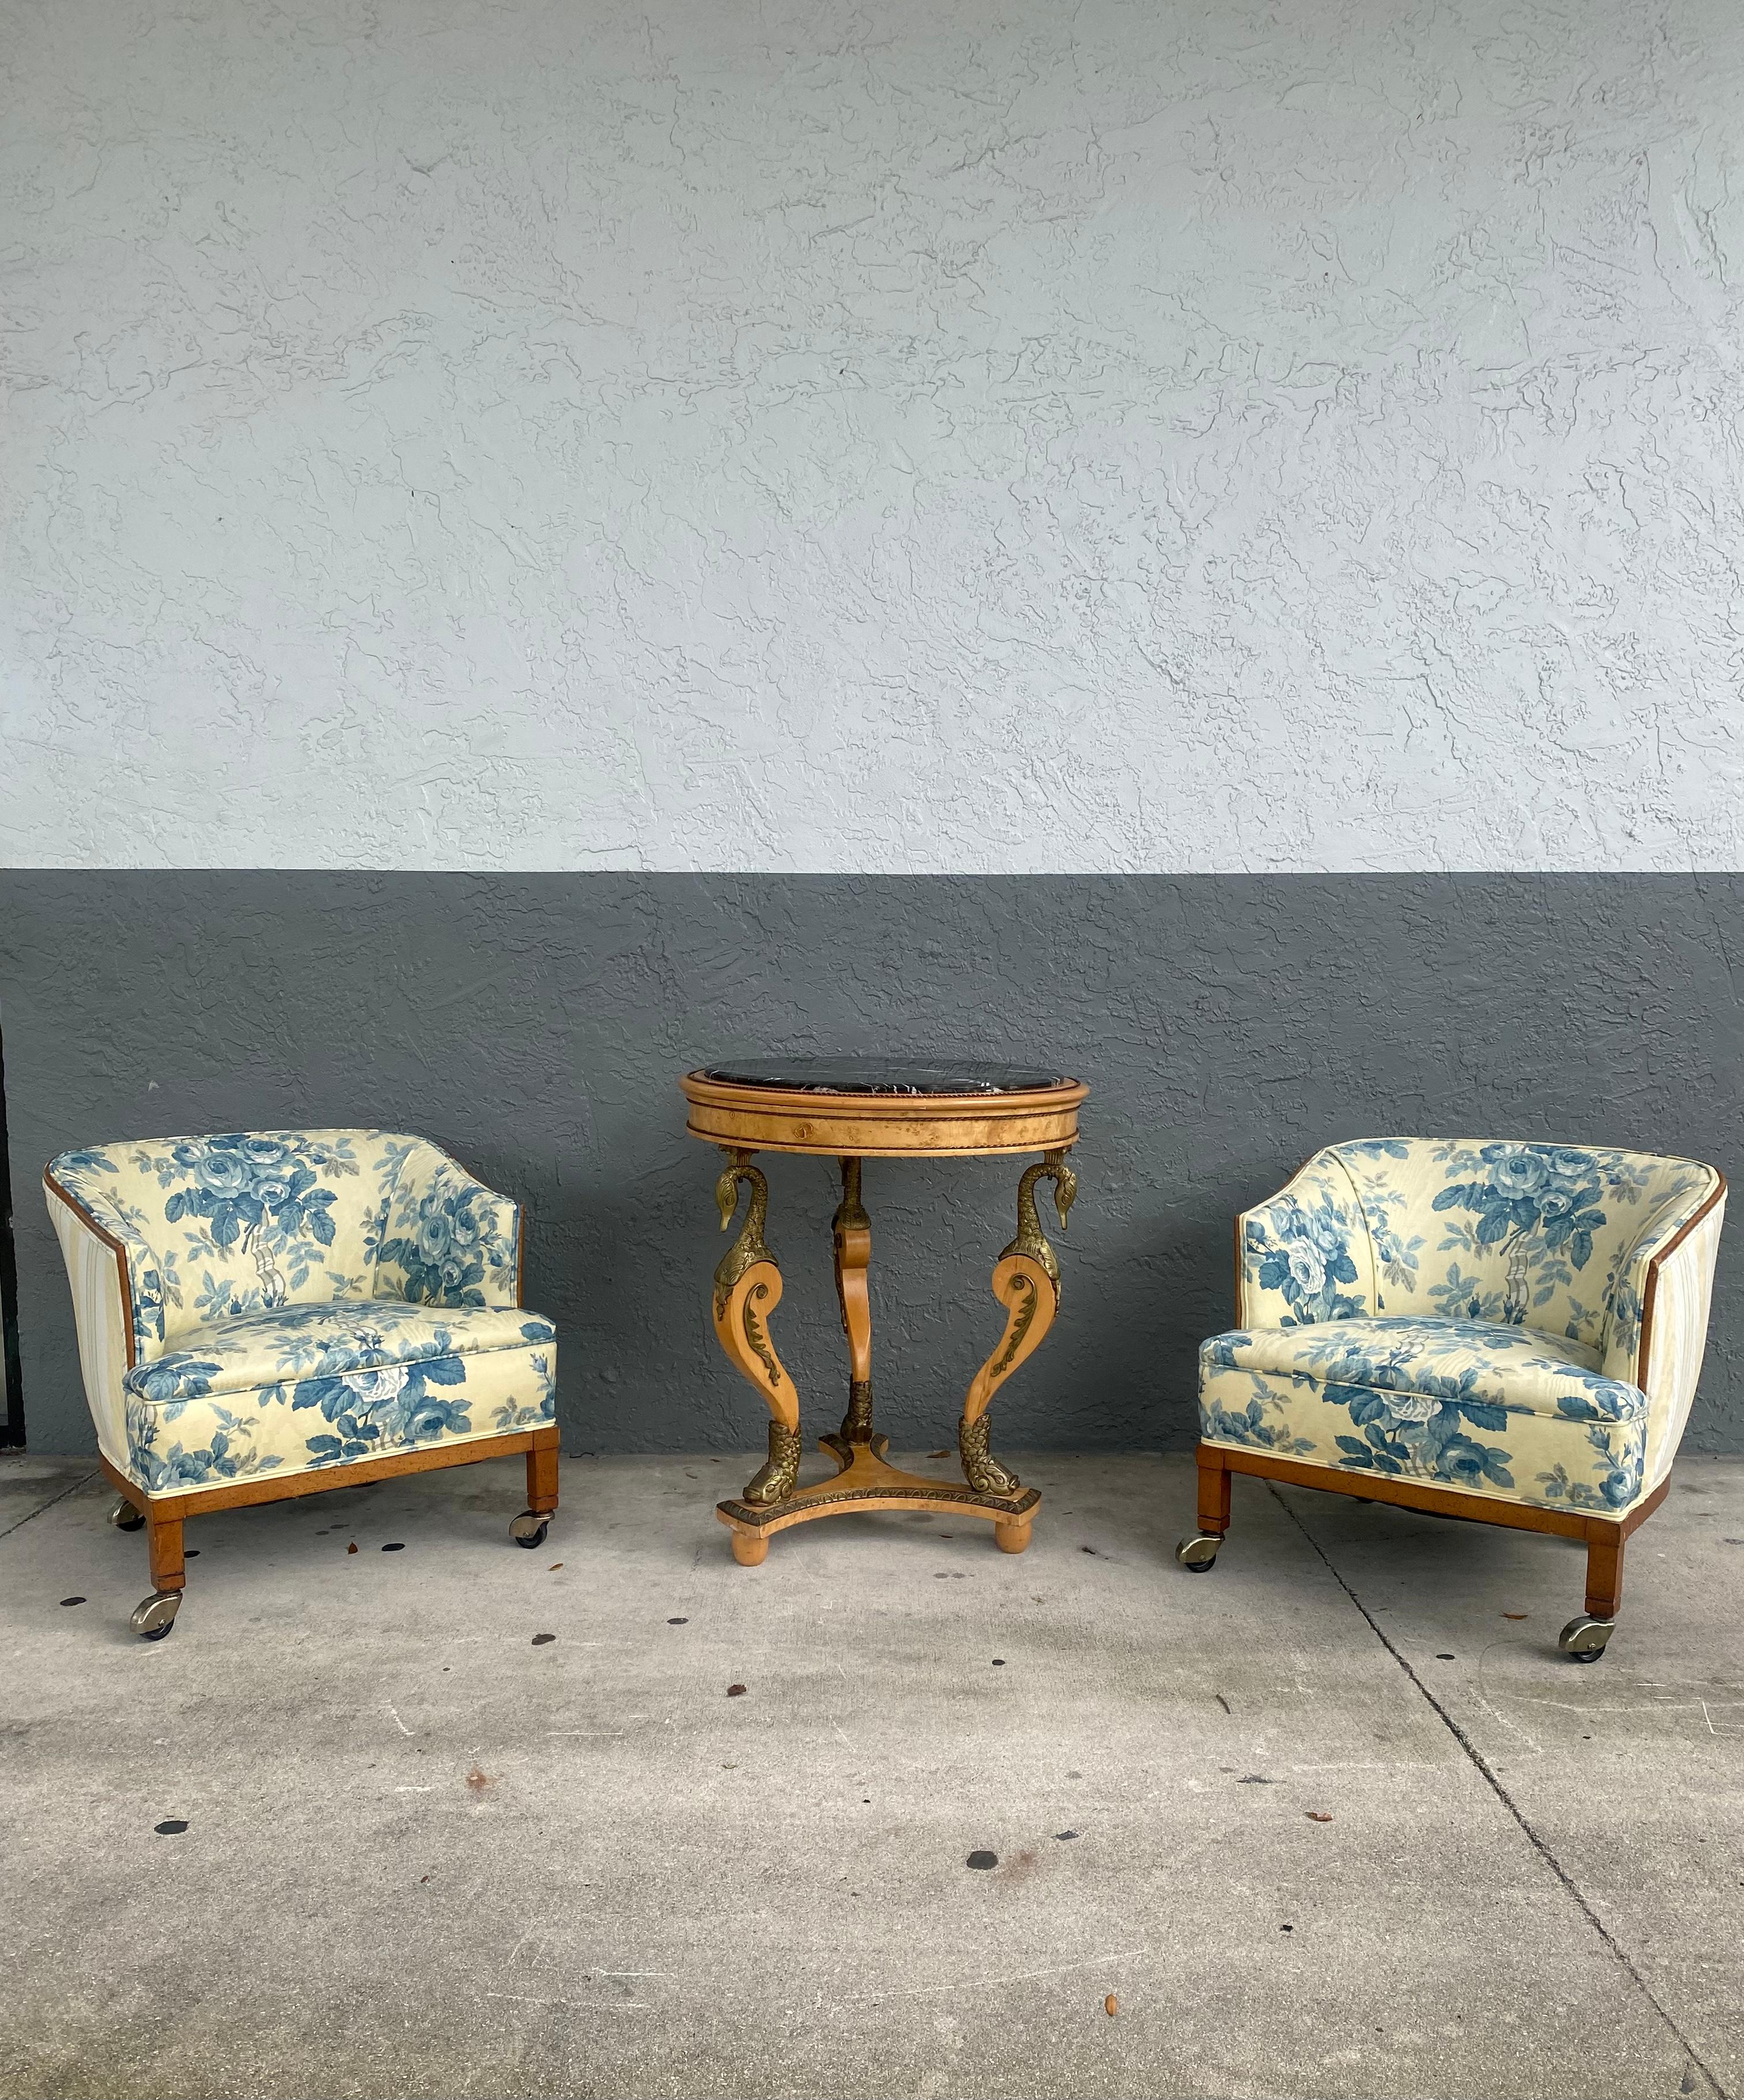 1960s French Toile Barrel Back Wood Castors Chairs, Set of 2 For Sale 3